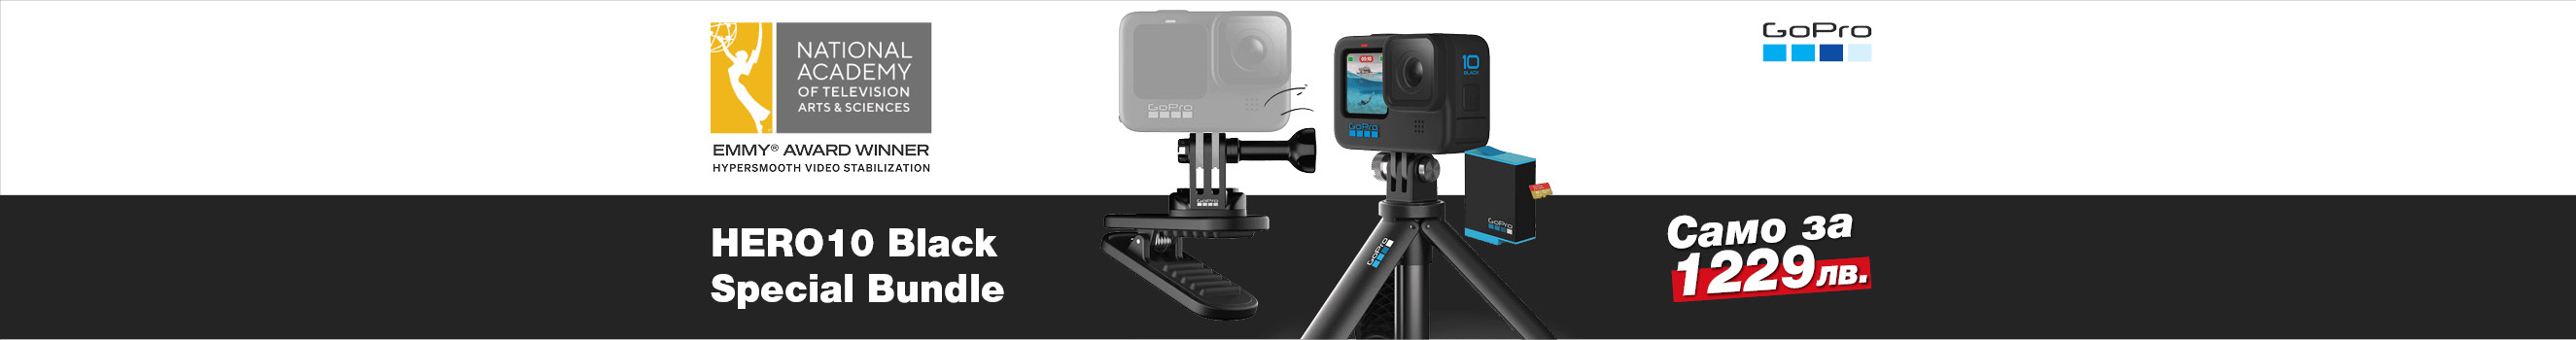  GoPro HERO10 Black Special Bundle at special price in PhotoSynthesis Stores